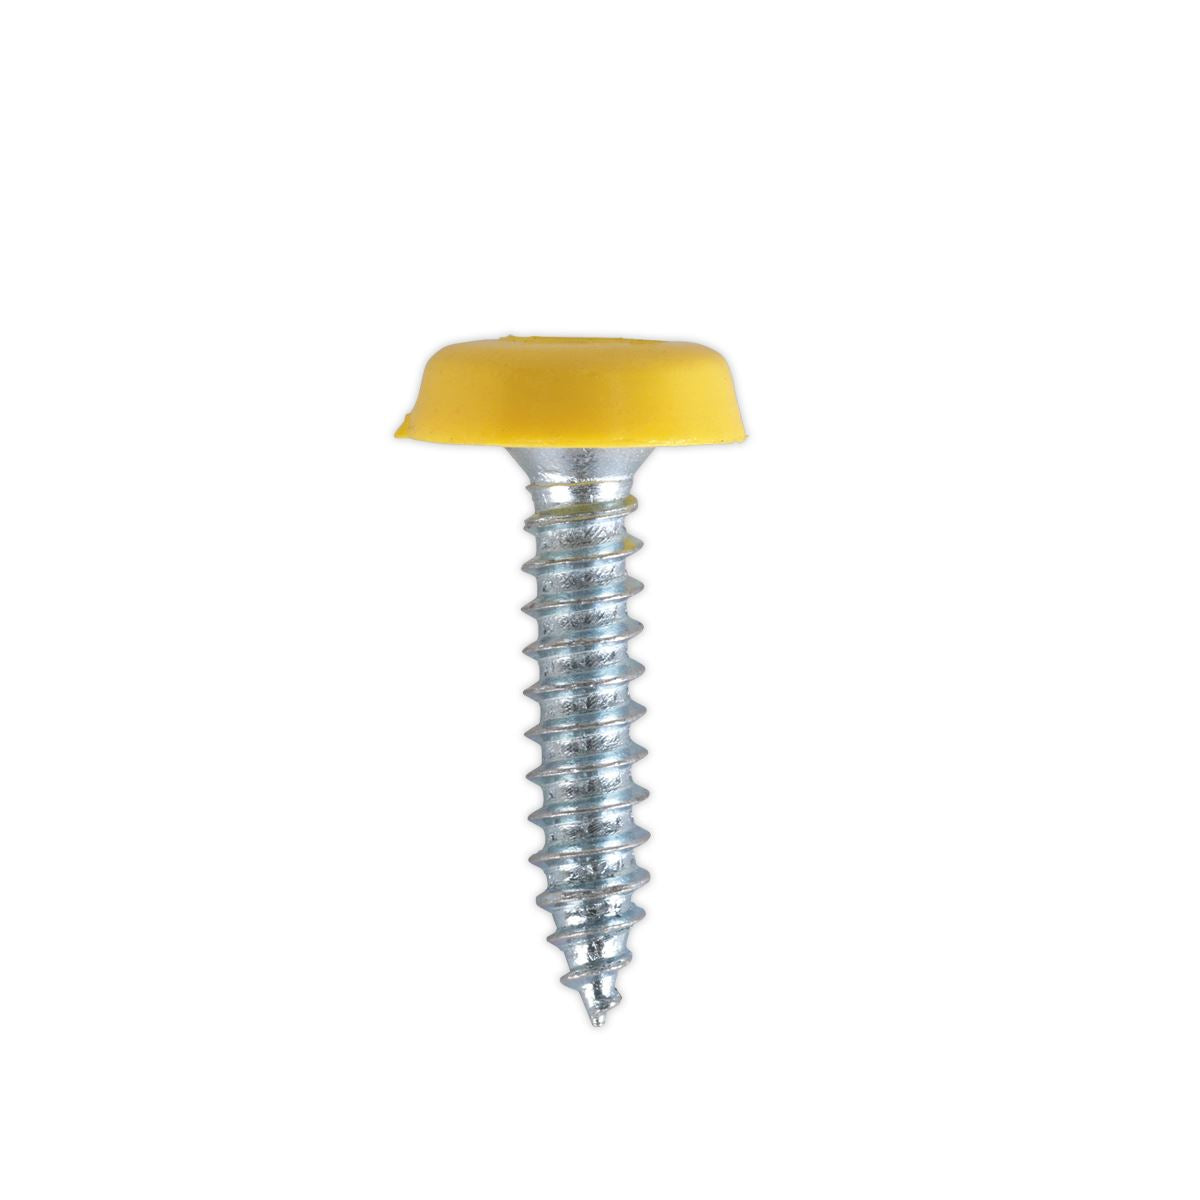 Sealey Numberplate Screw Plastic Enclosed Head 4.8 x 24mm Yellow Pack of 50